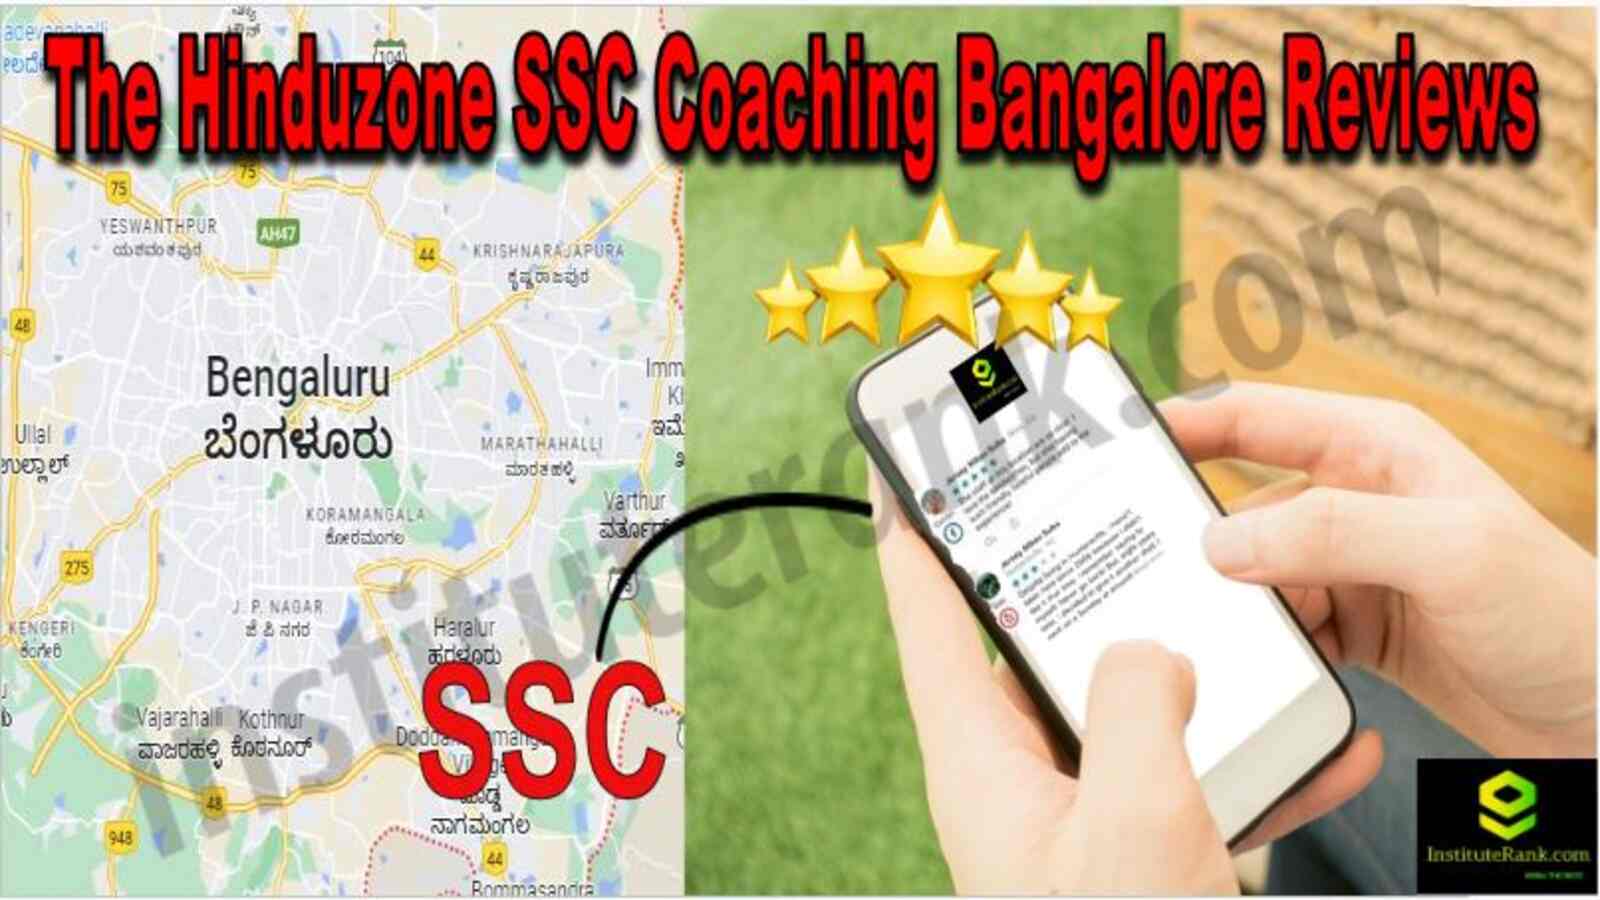 The Hinduzone SSC Coaching in Bangalore Reviews